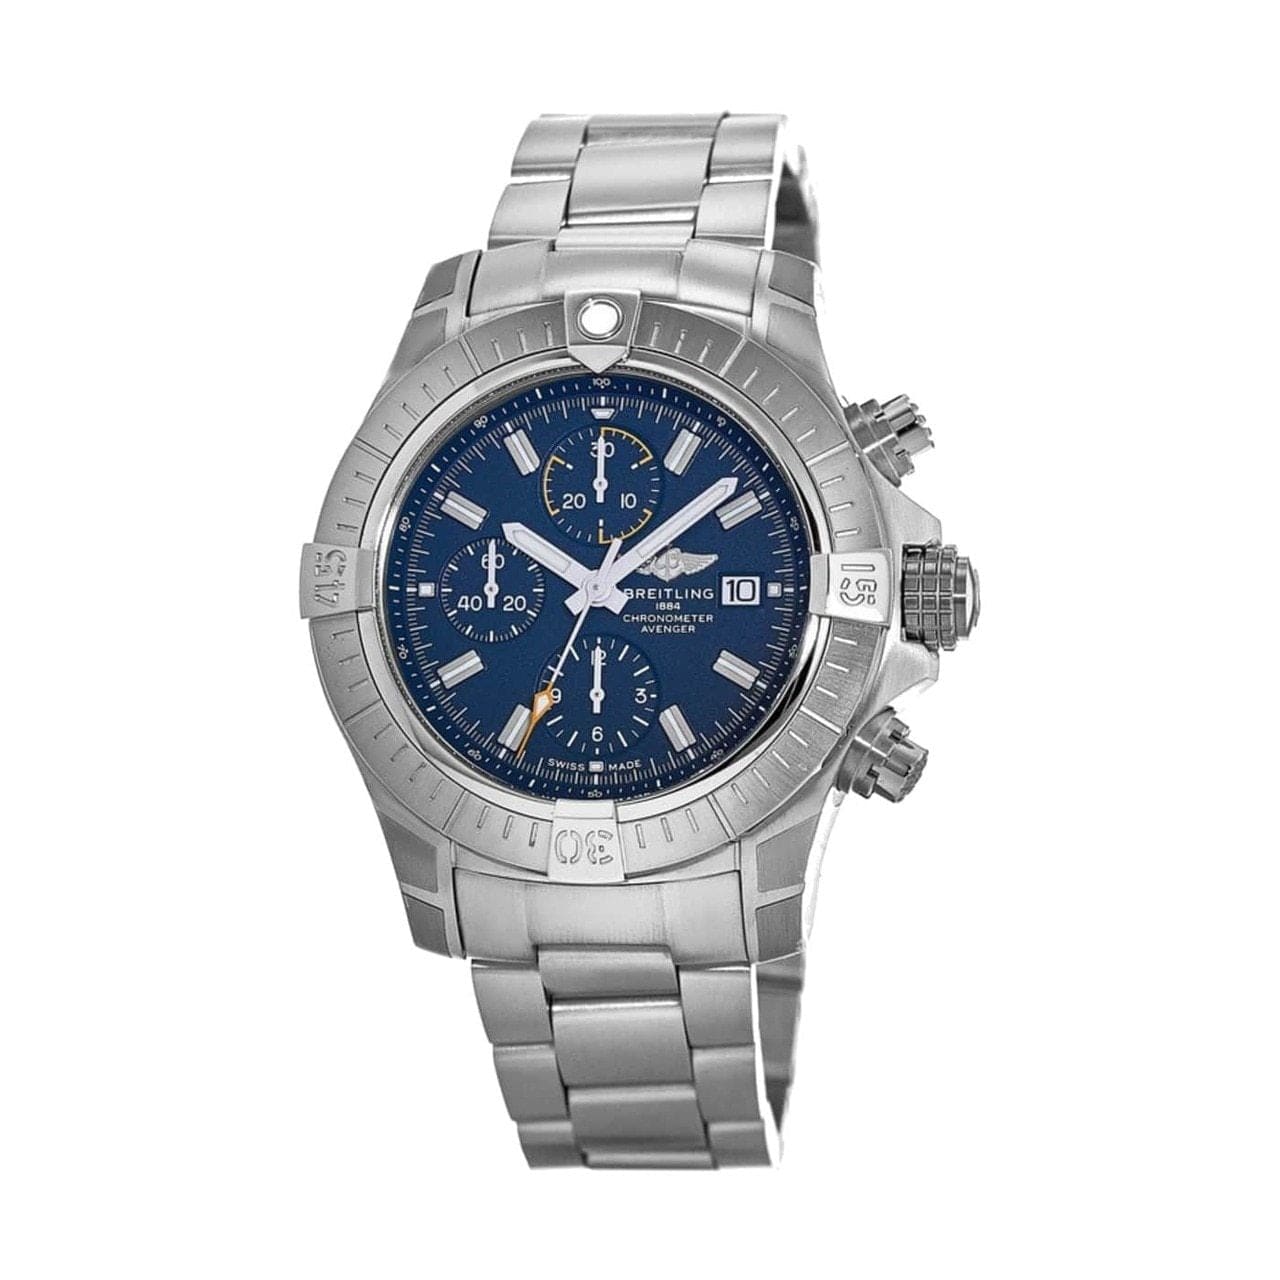 Breitling A13317101C1A1 Avenger Chronograph Stainless Steel Blue Dial Men's Chronograph Watch 842047179543